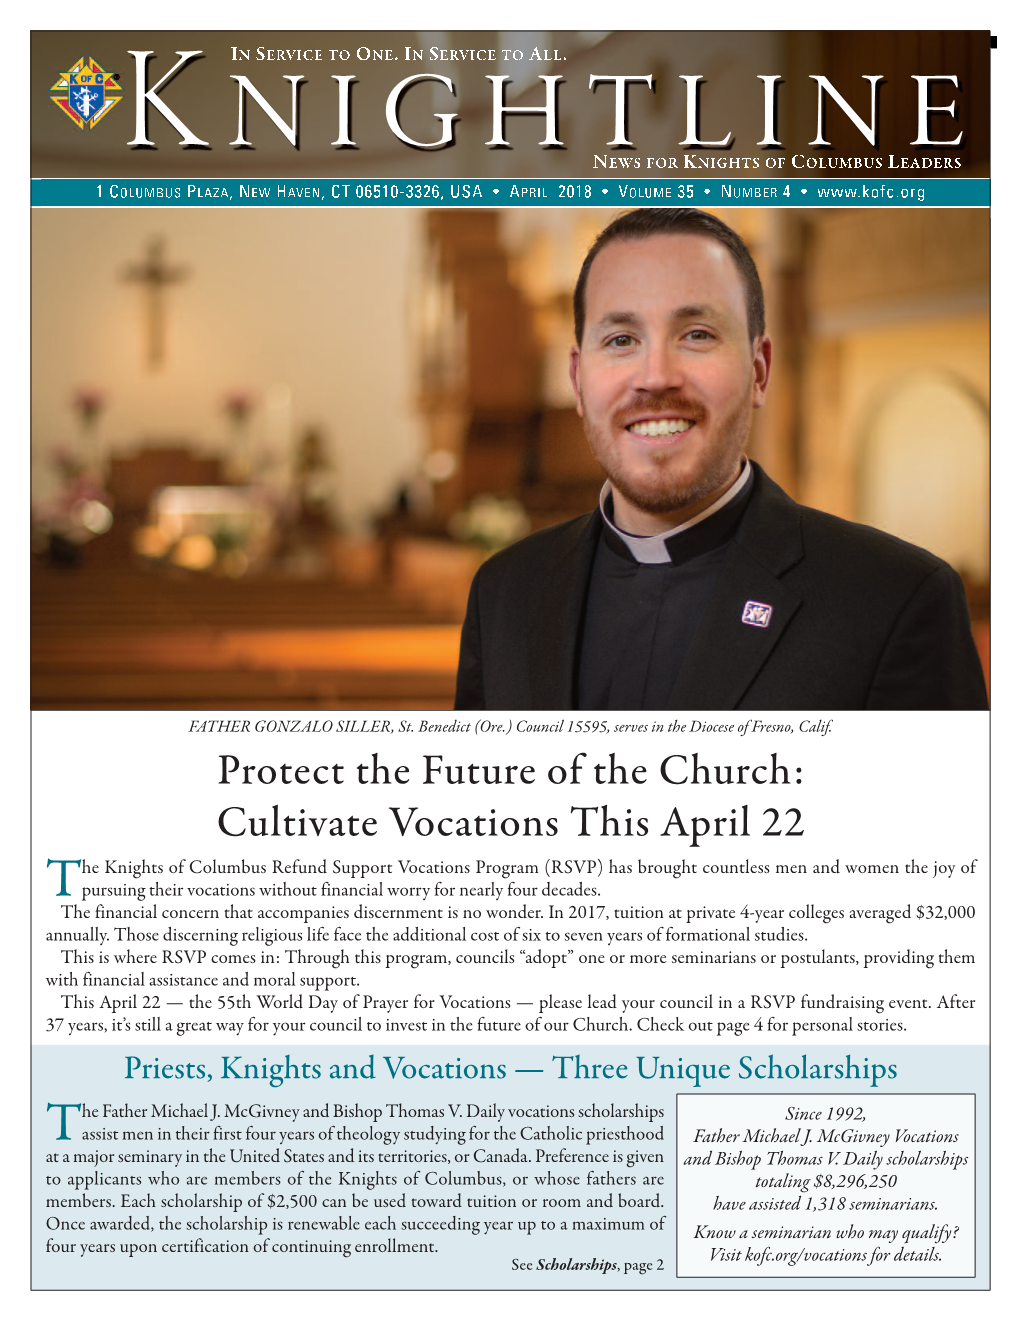 Protect the Future of the Church